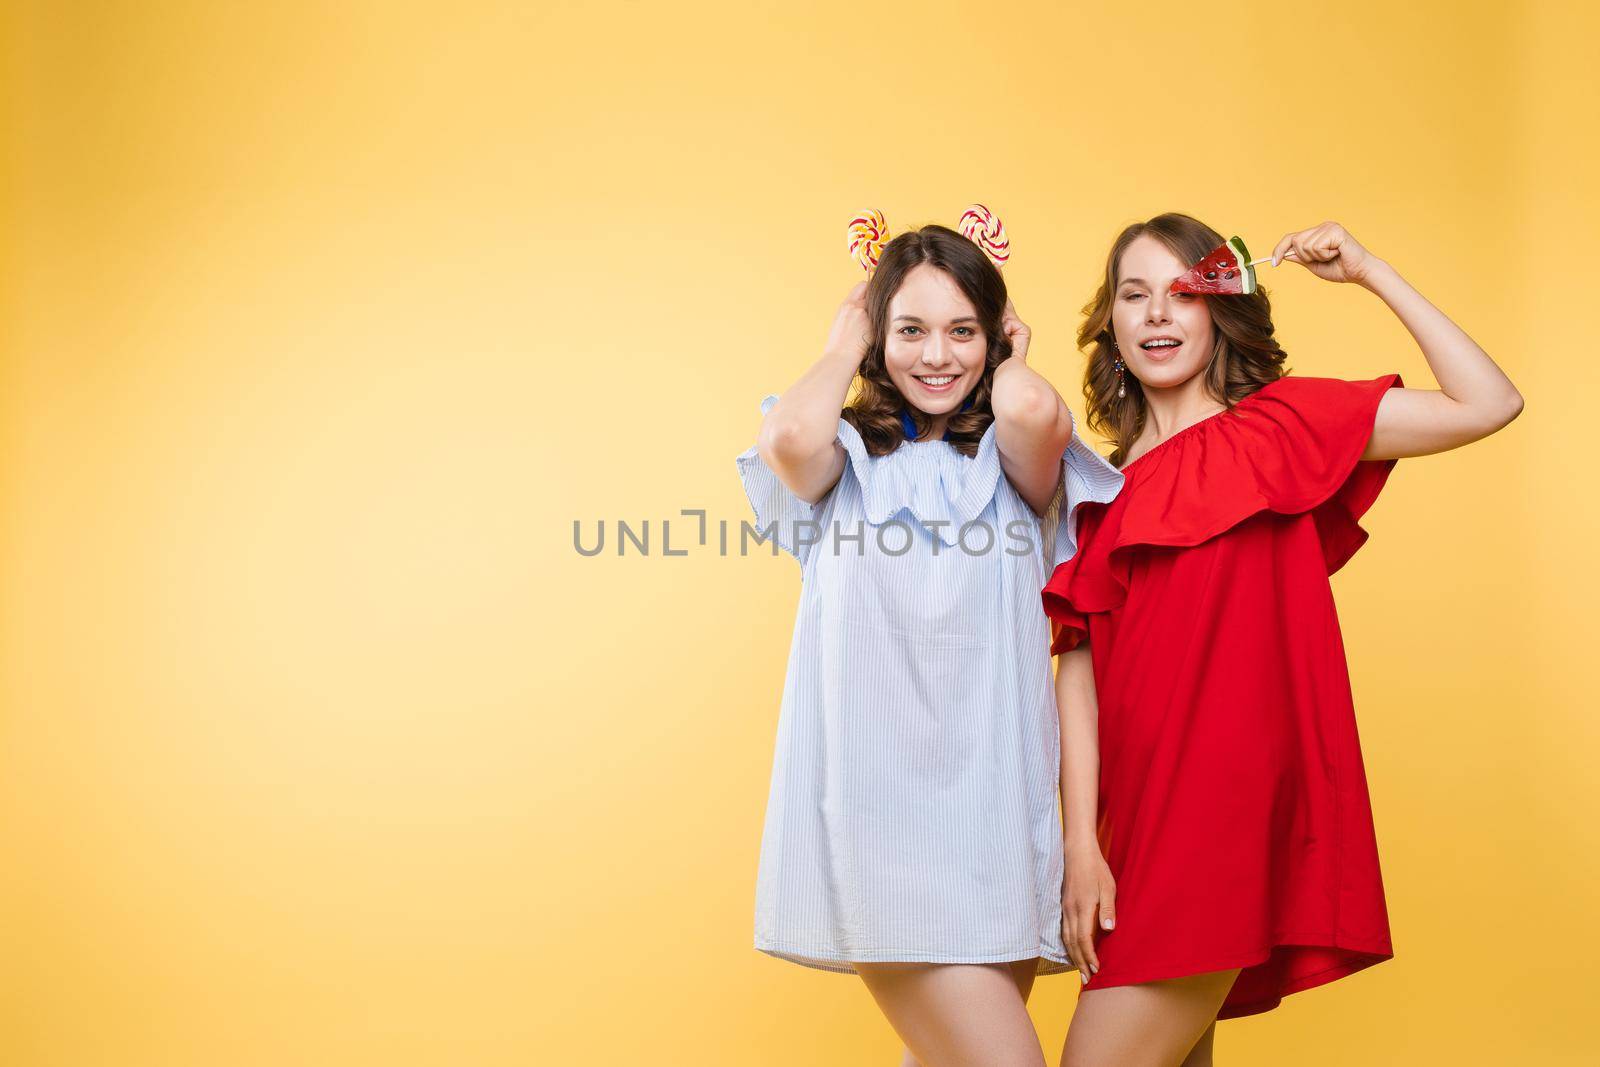 Horizontal portrait of two cheerful young women having fun together on background.